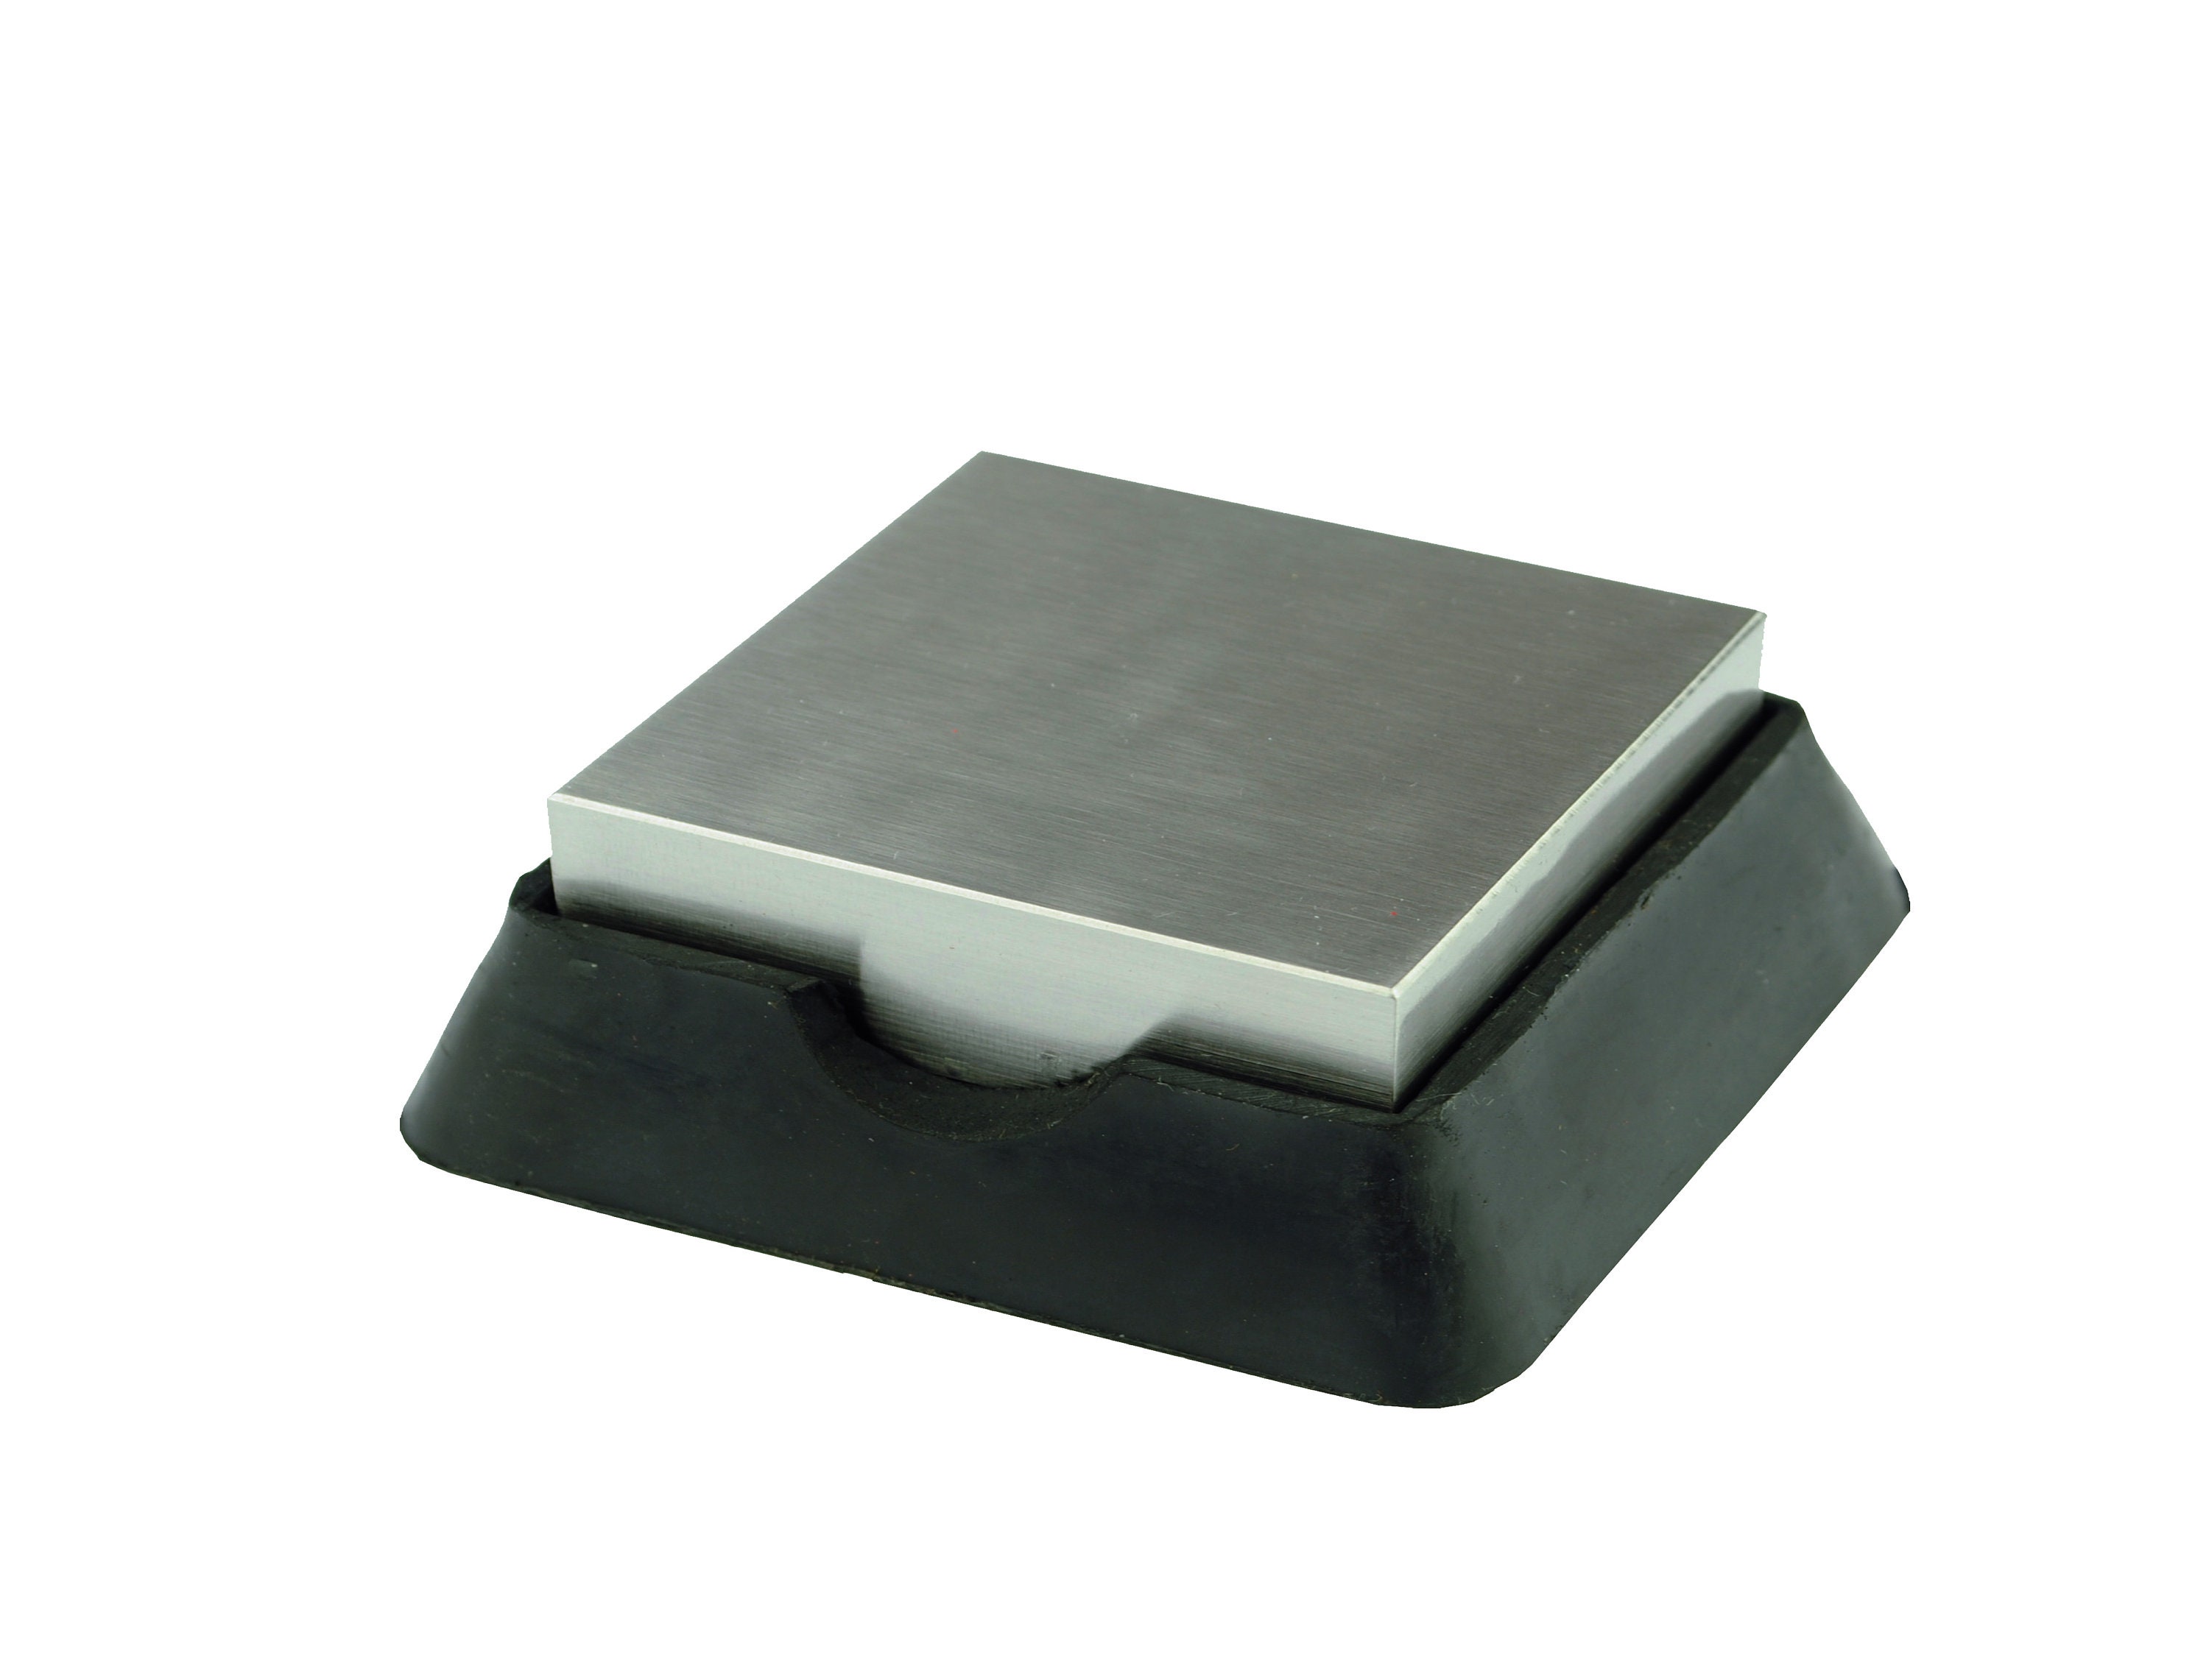 Steel Bench Block, Chrome Plated, 1 7/8 in (47.6 mm x 47.6 mm